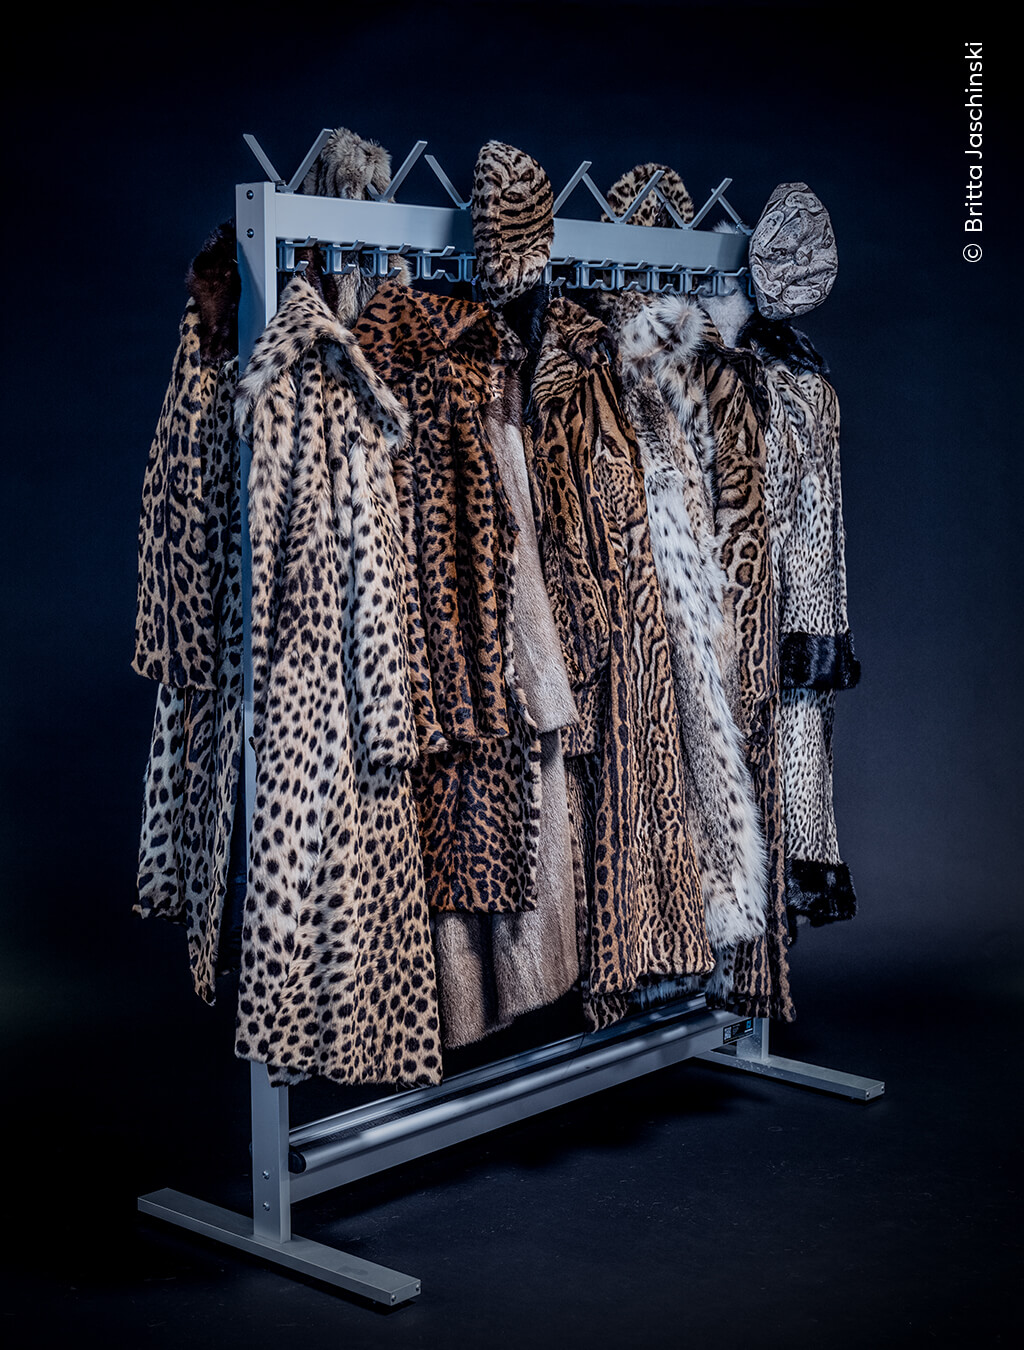 Confiscated coats, made from the skins of some of the most endangered big cats, are held by customs officers from across Europe.